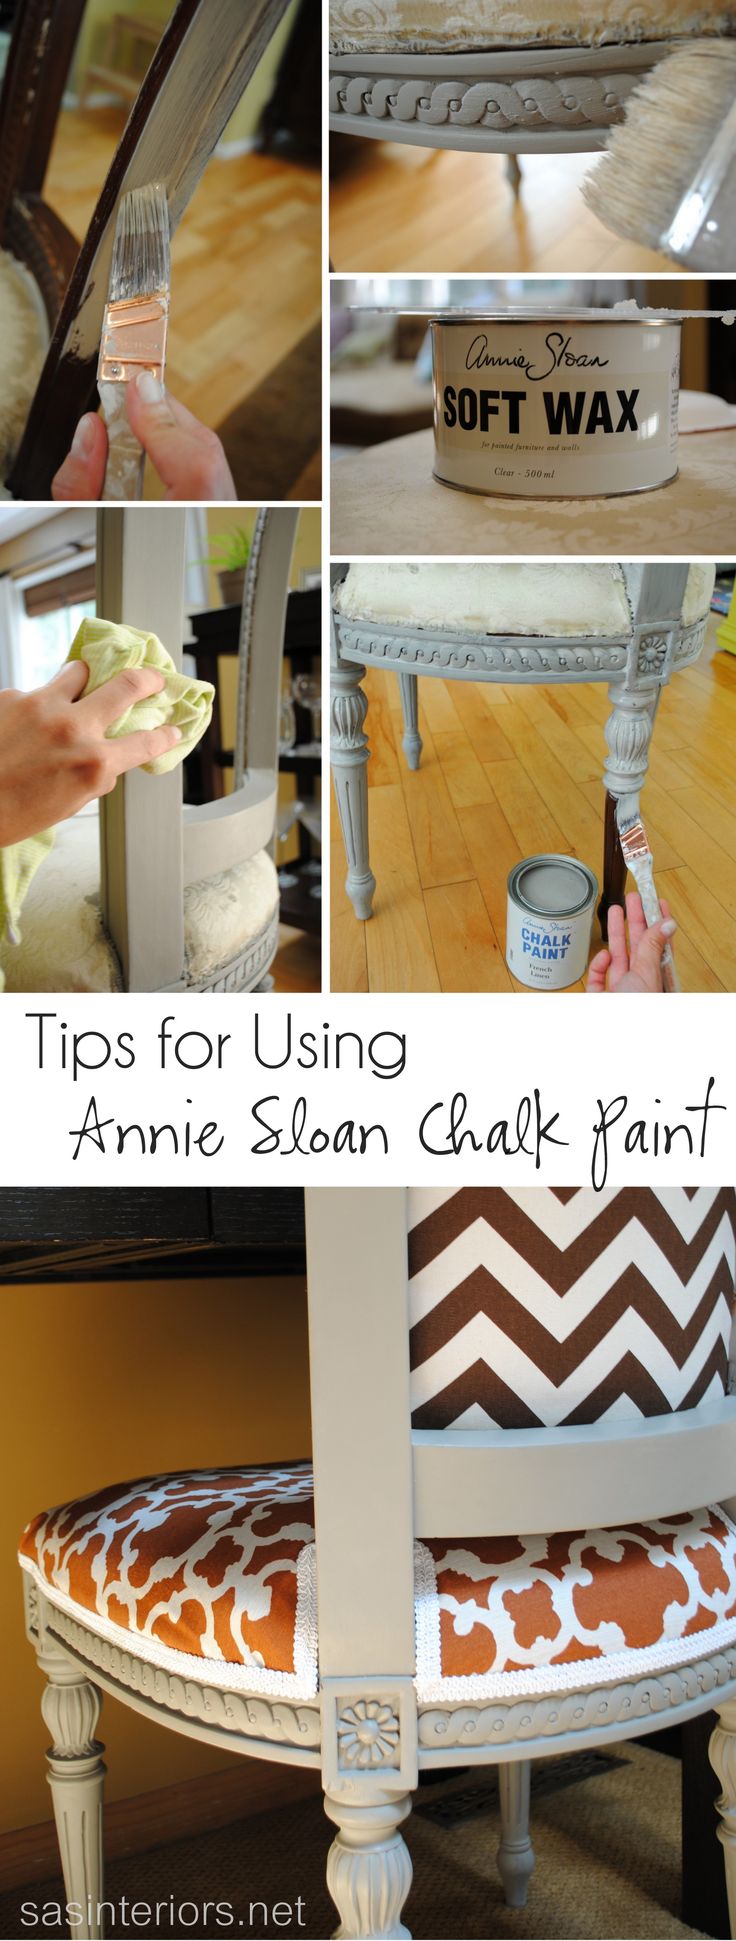 Tips for Using Annie Sloan Chalk Paint